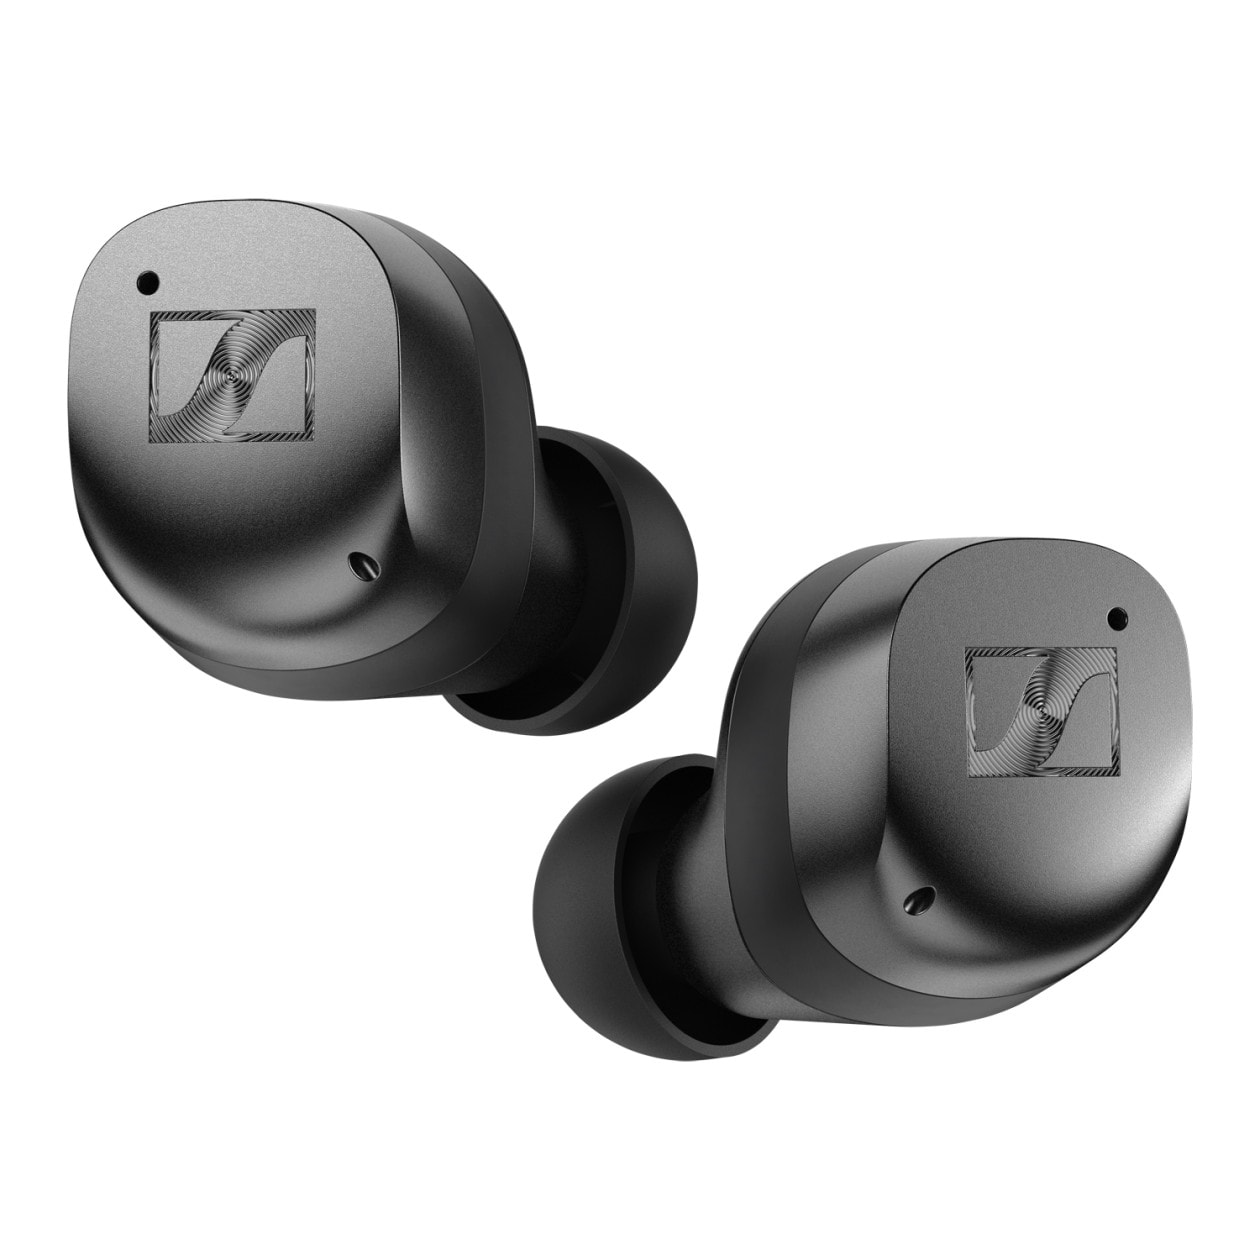 The new ANC earbuds support a bunch of Bluetooth codecs.